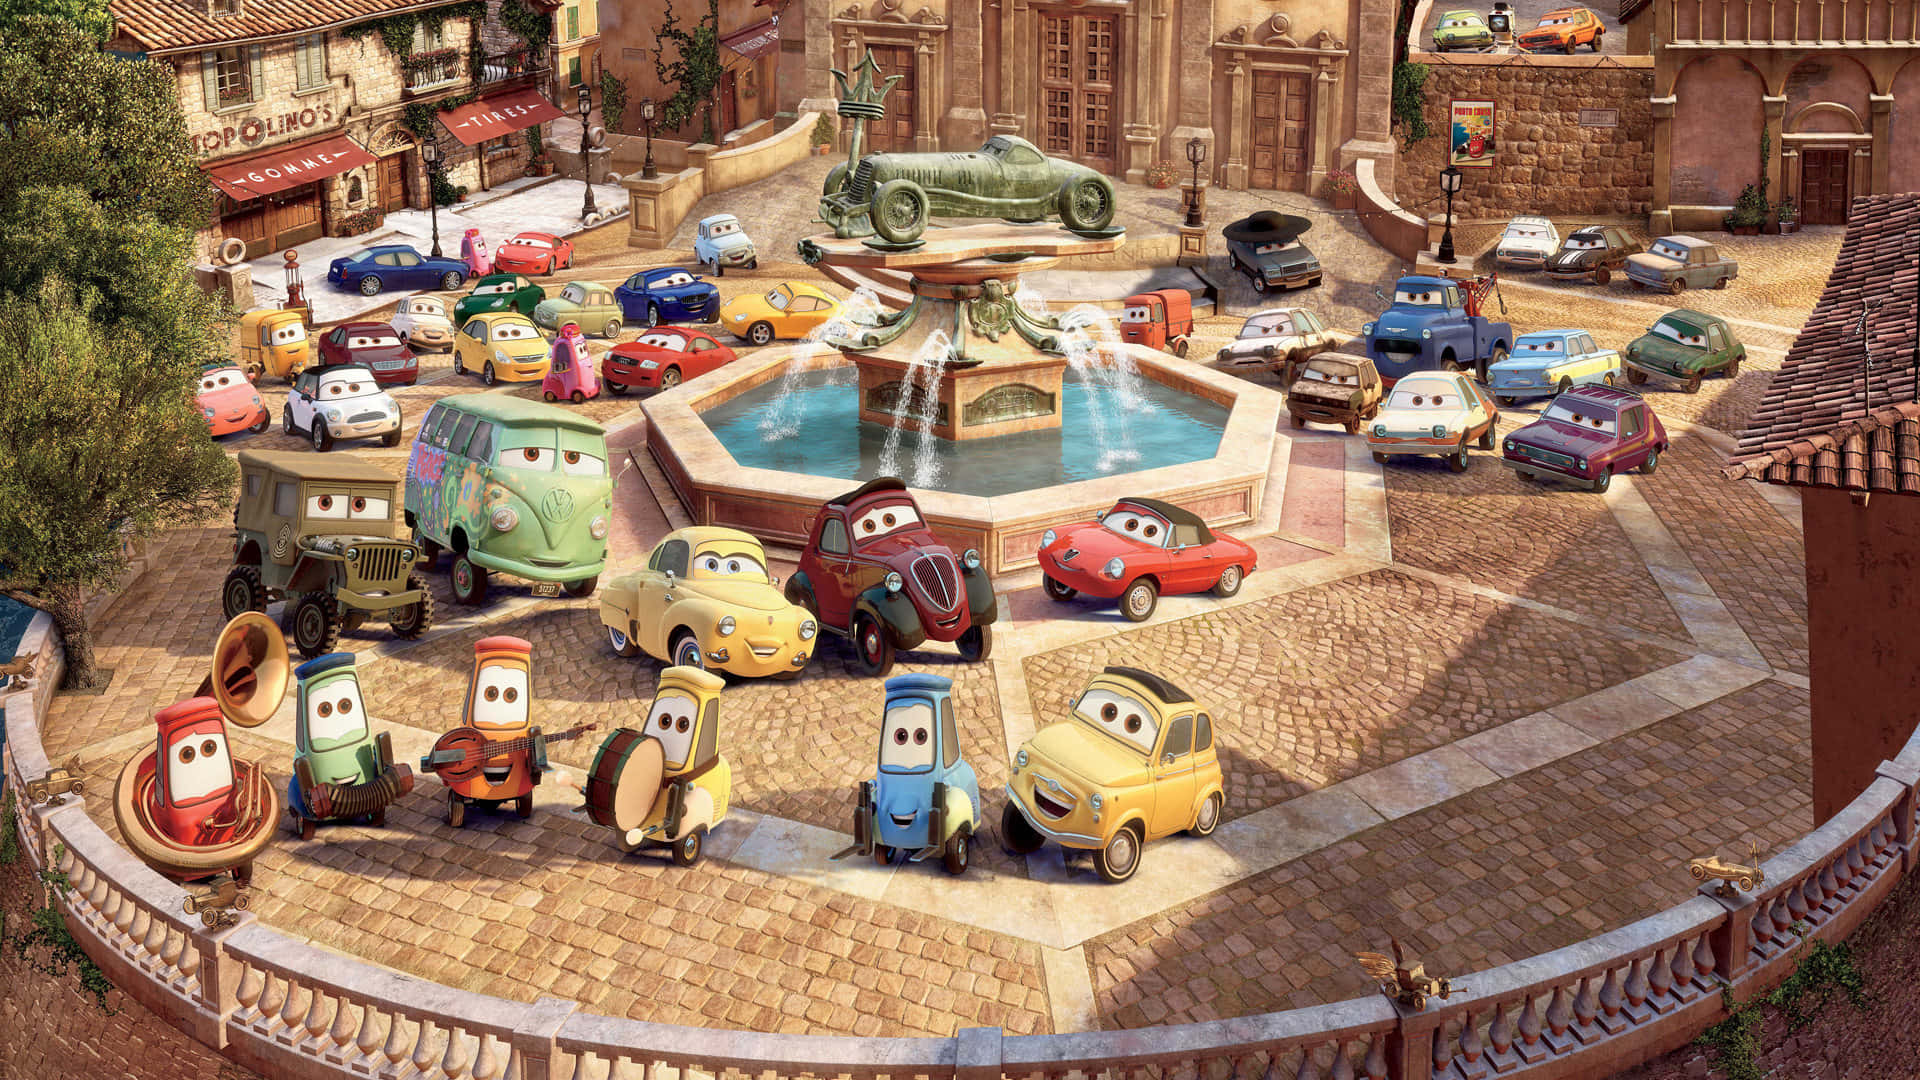 Lightning McQueen and Mater in the Heart of Radiator Springs